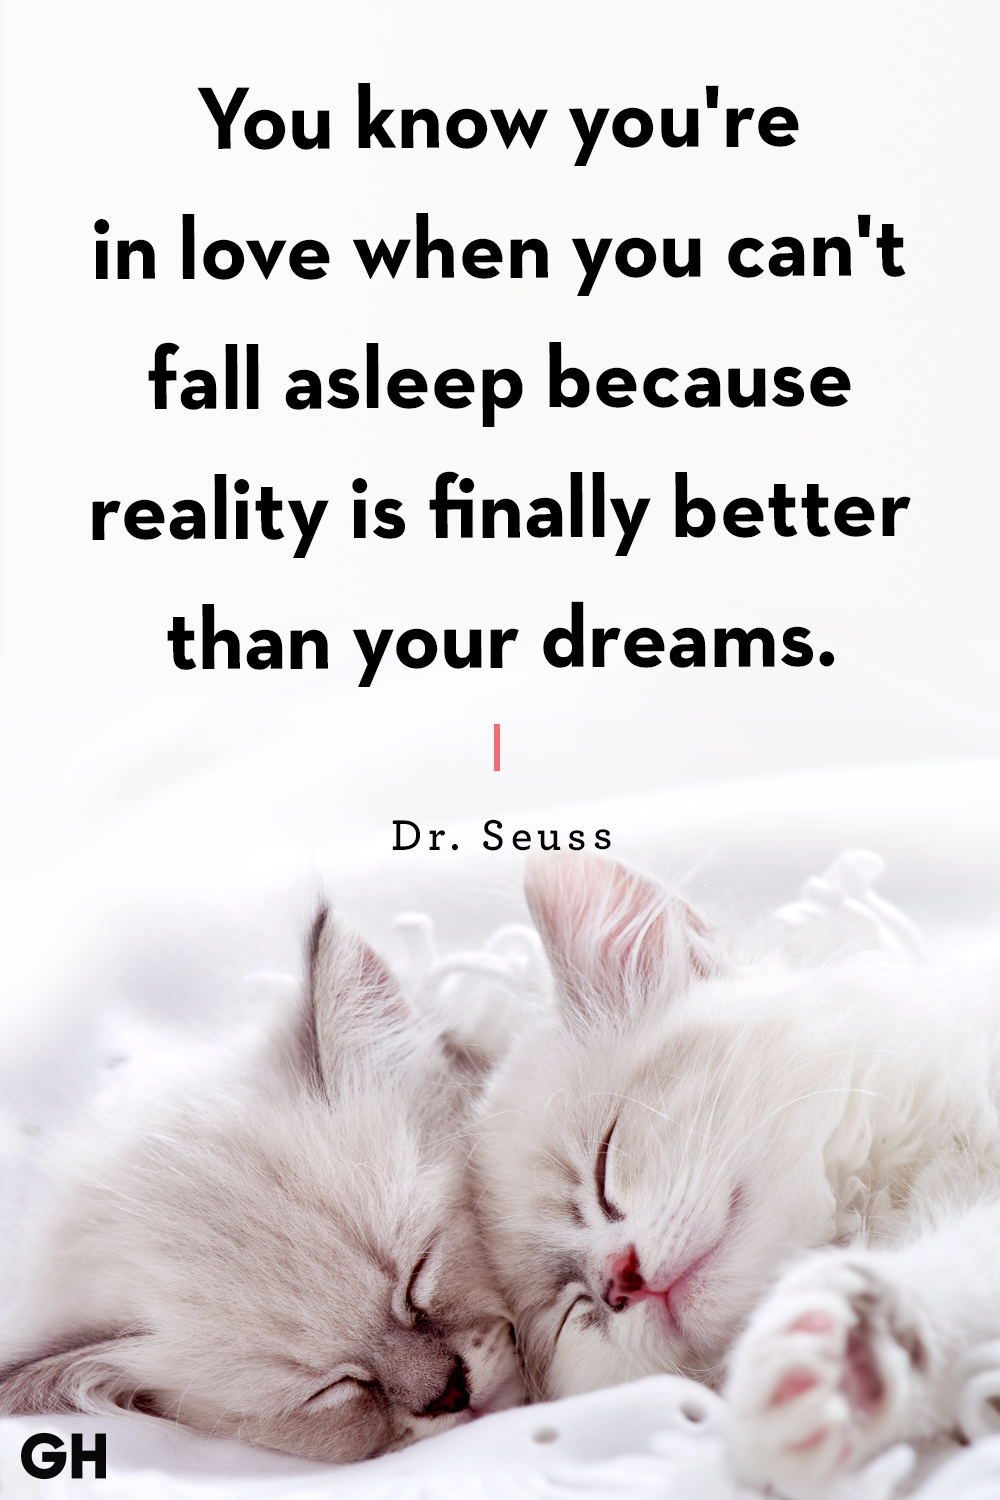 you know you’re in love when you can’t fall asleep because reality is finally better than your dreams. dr. seuss